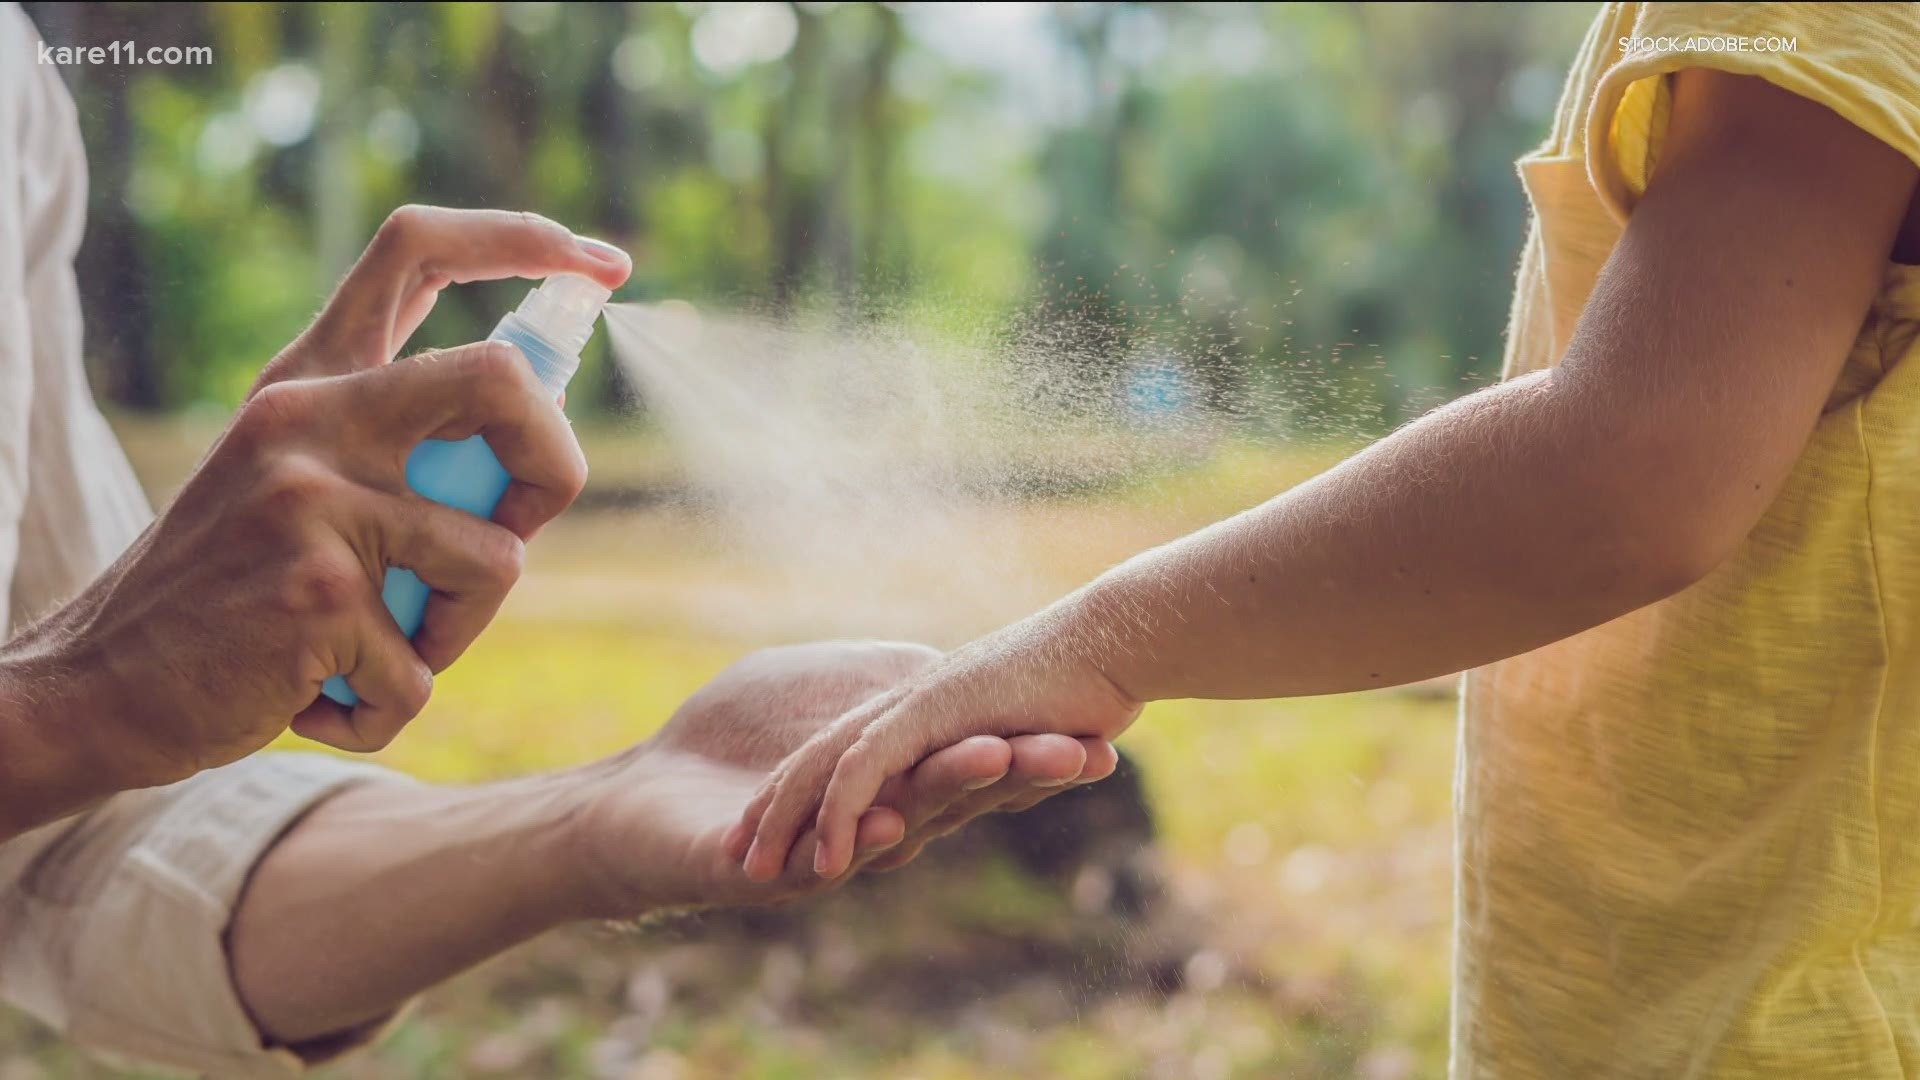 Dr. Bobbi Pritt and Dr. Dawn Davis give tips on preventing and treating insect and bug bites.